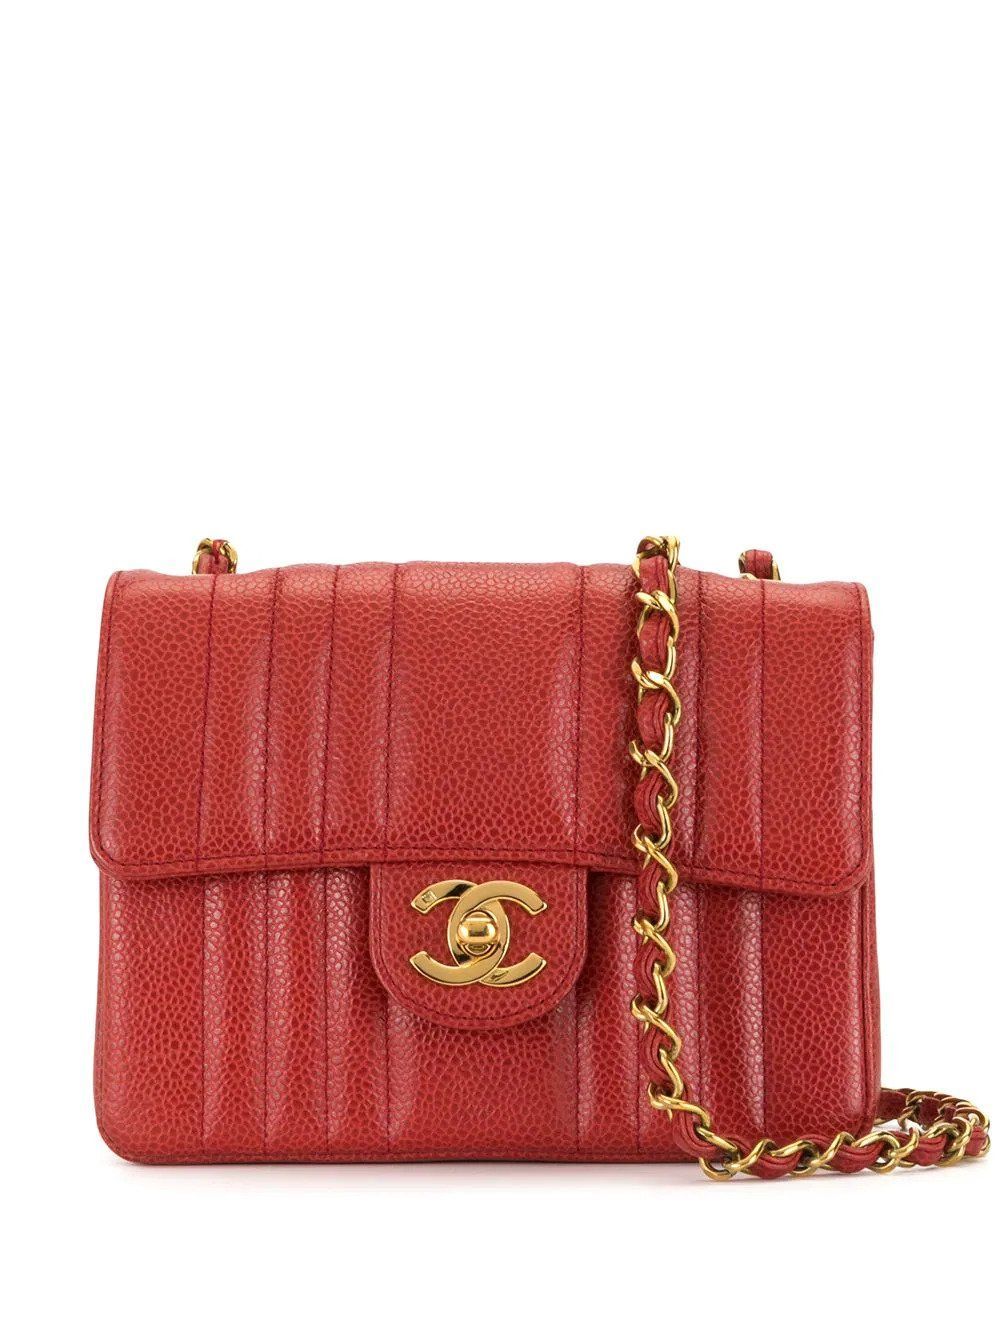 7 Budget Friendly Chanel Bags for Under 6K  luxfy